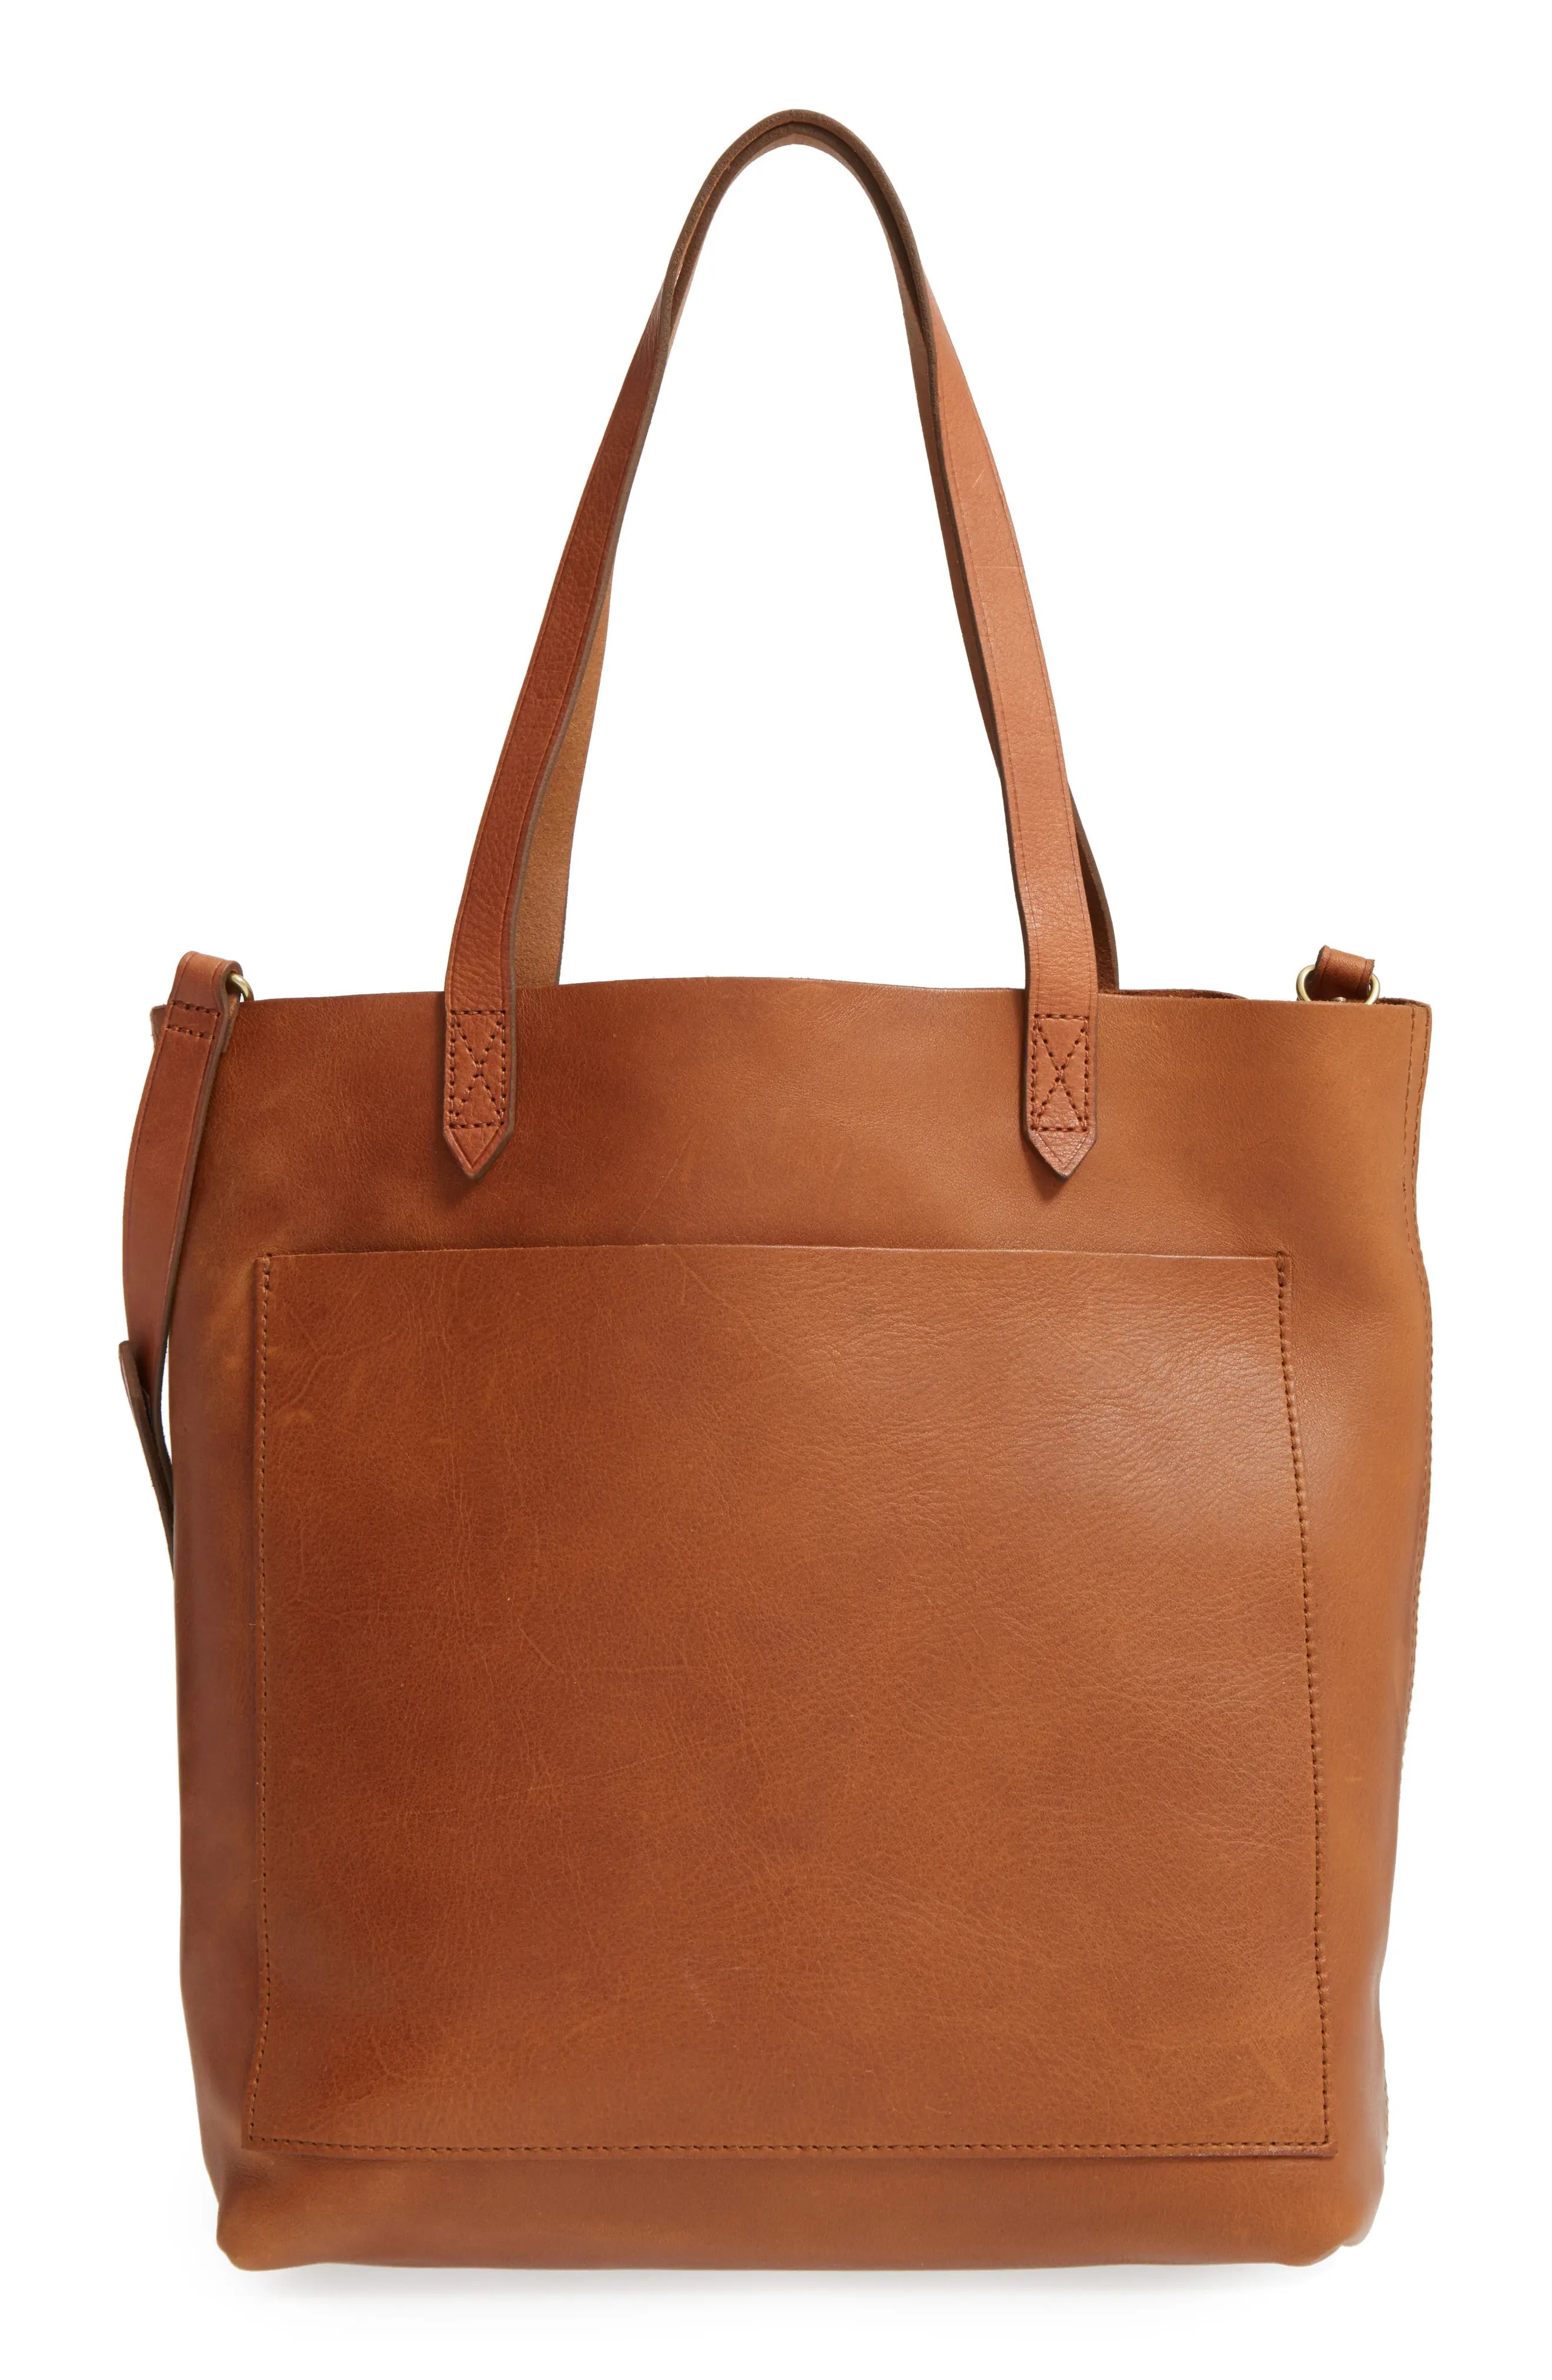 Madewell Medium Leather Transport Tote - Brown | Nordstrom